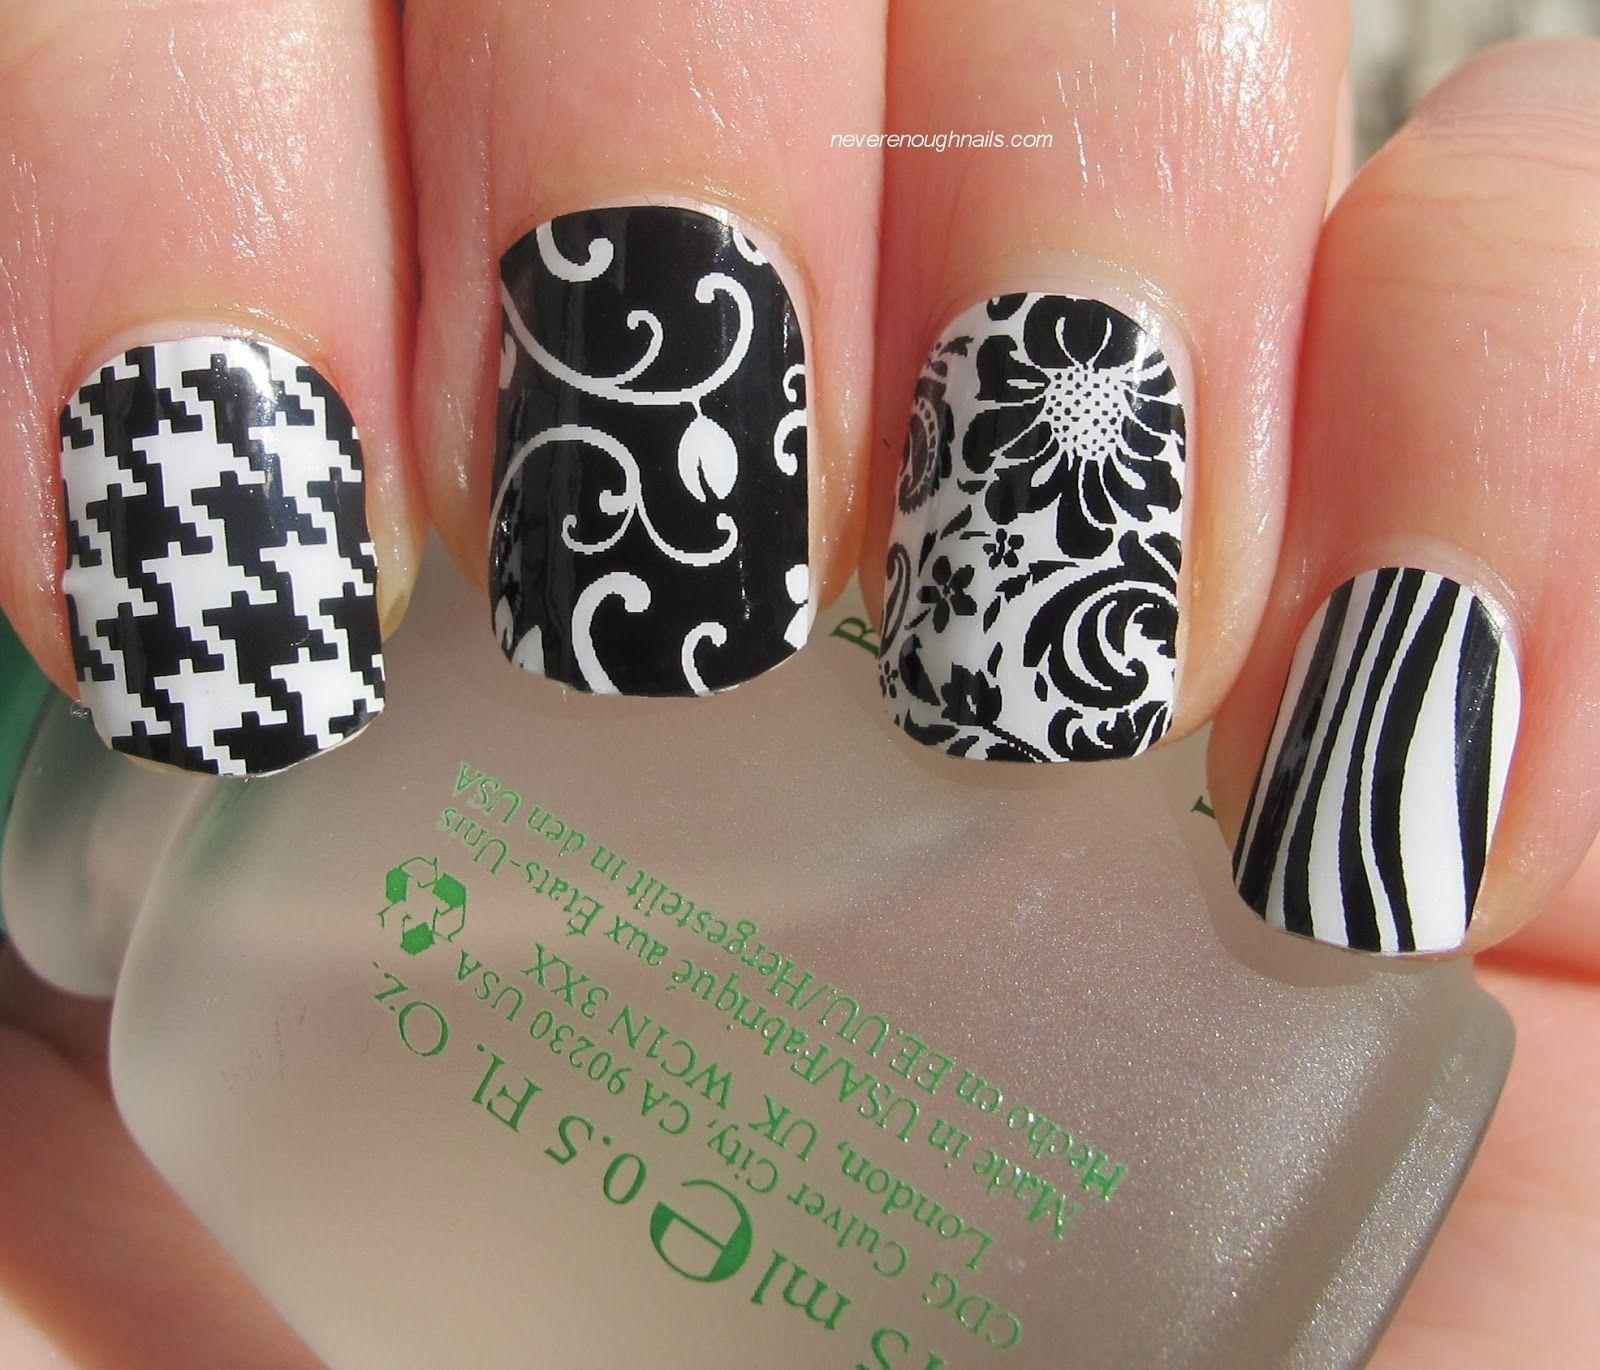 Jamberry Black and White Logo - Never Enough Nails: Jamberry Nails Black and White Mani!